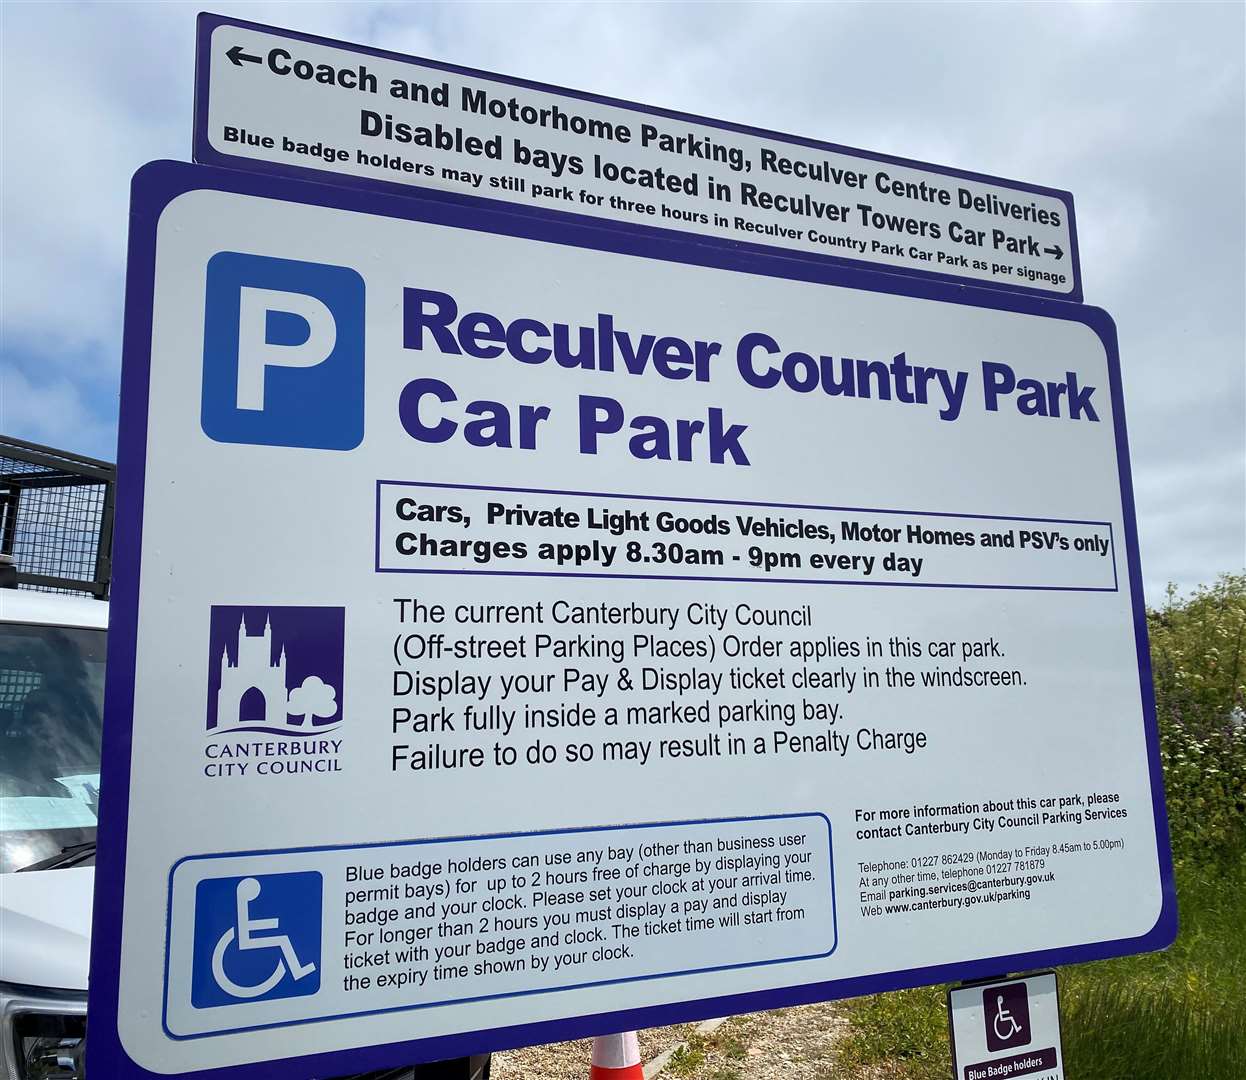 The entry to Reculver Country Park car park makes no mention of dogs